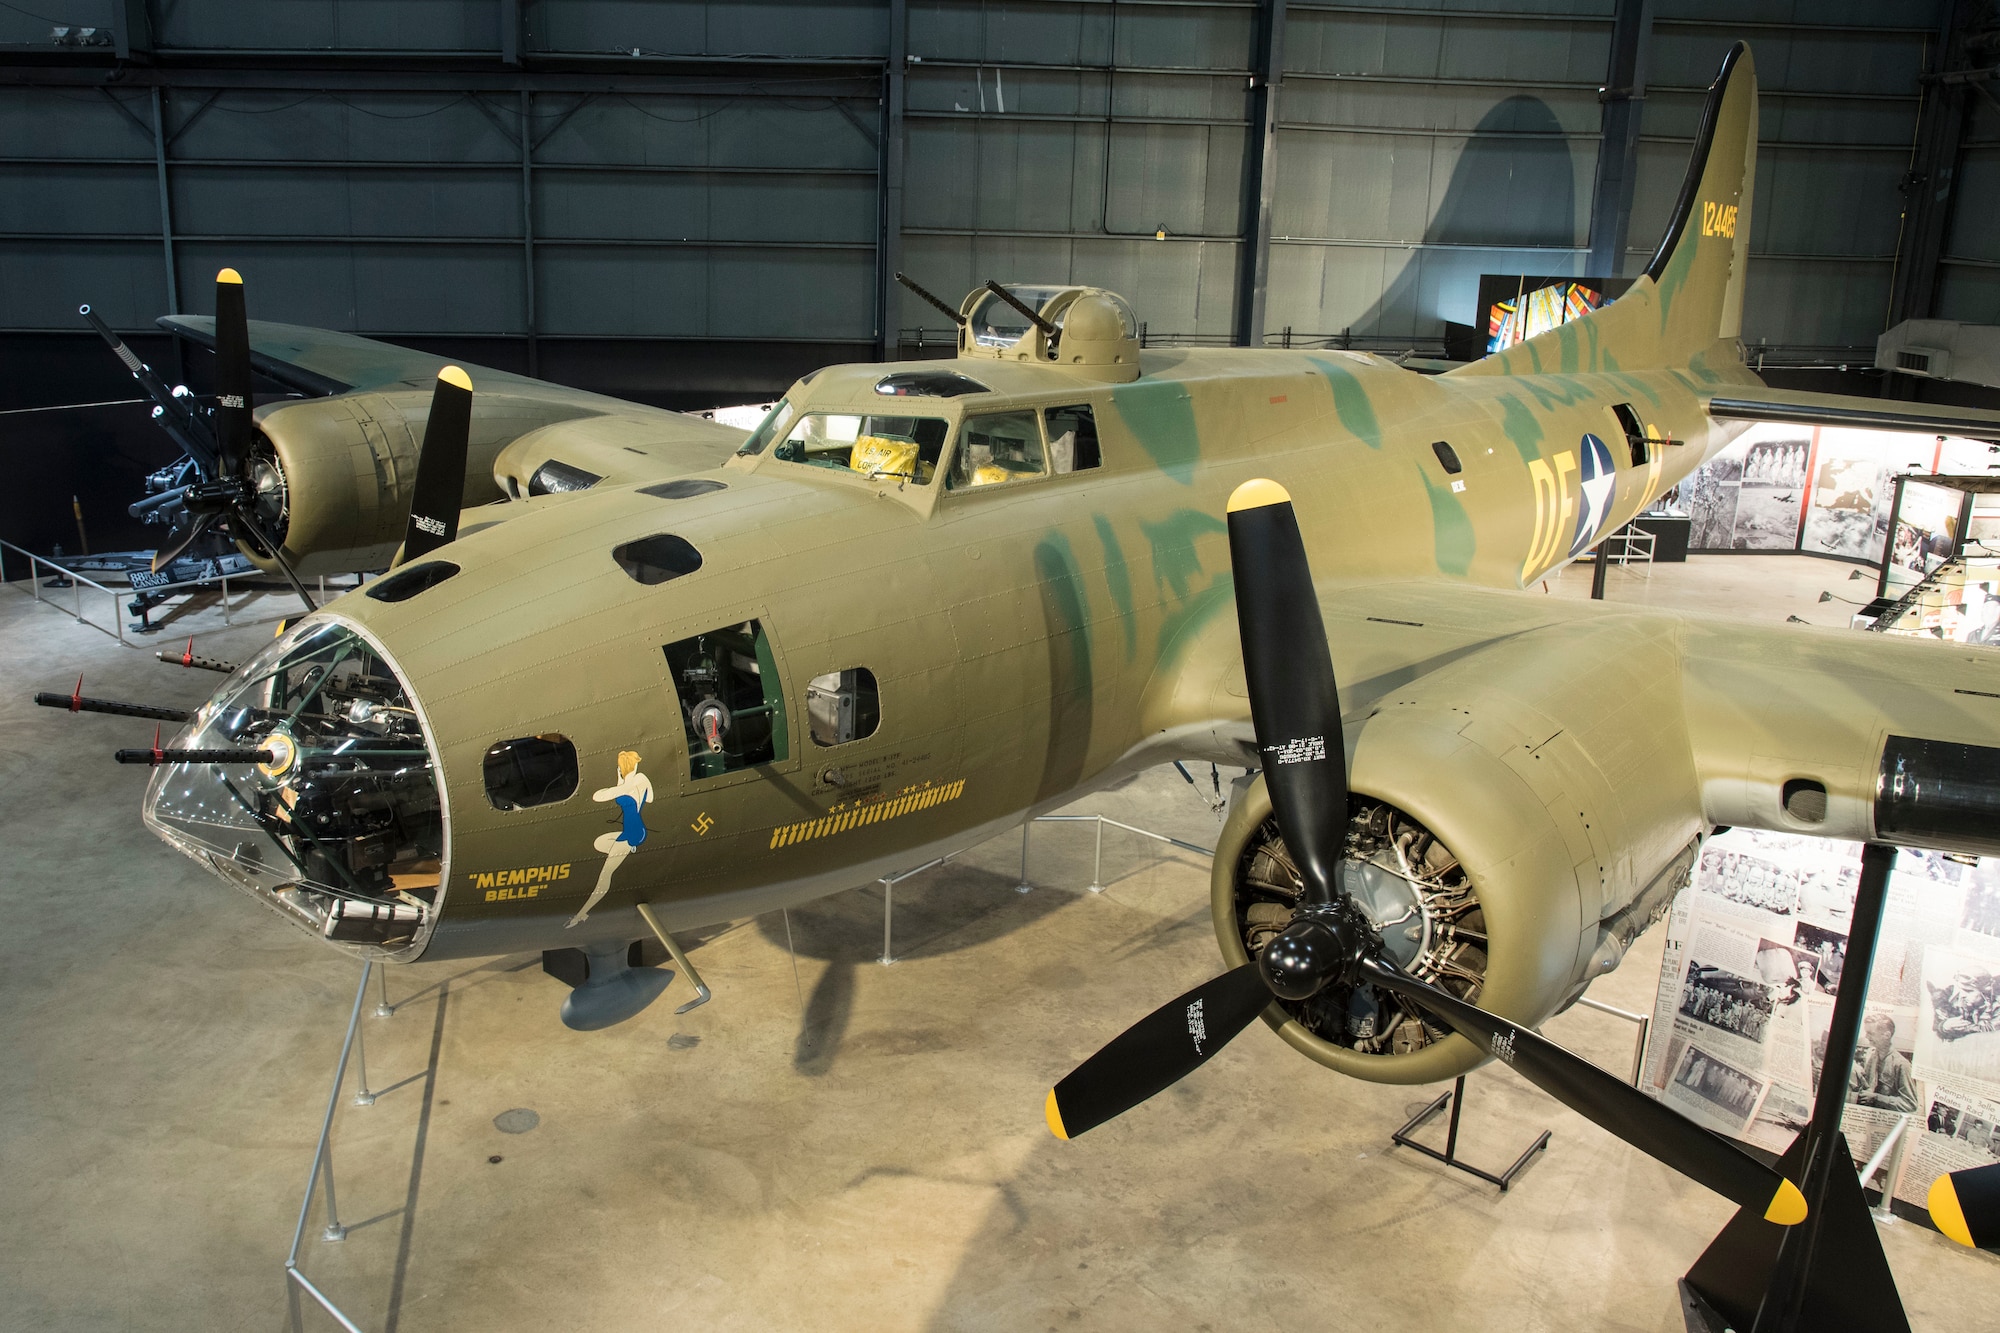 Boeing B-17F Memphis Belle on display in the WWII Gallery at the National Museum of the United States Air Force. B-17's  flew in every combat zone during World War II, but its most significant service was over Europe. Along with the B-24 Liberator, the B-17 formed the backbone of the USAAF strategic bombing force, and it helped win the war by crippling Germany’s war industry.  (U.S. Air Force photo by Ken LaRock)